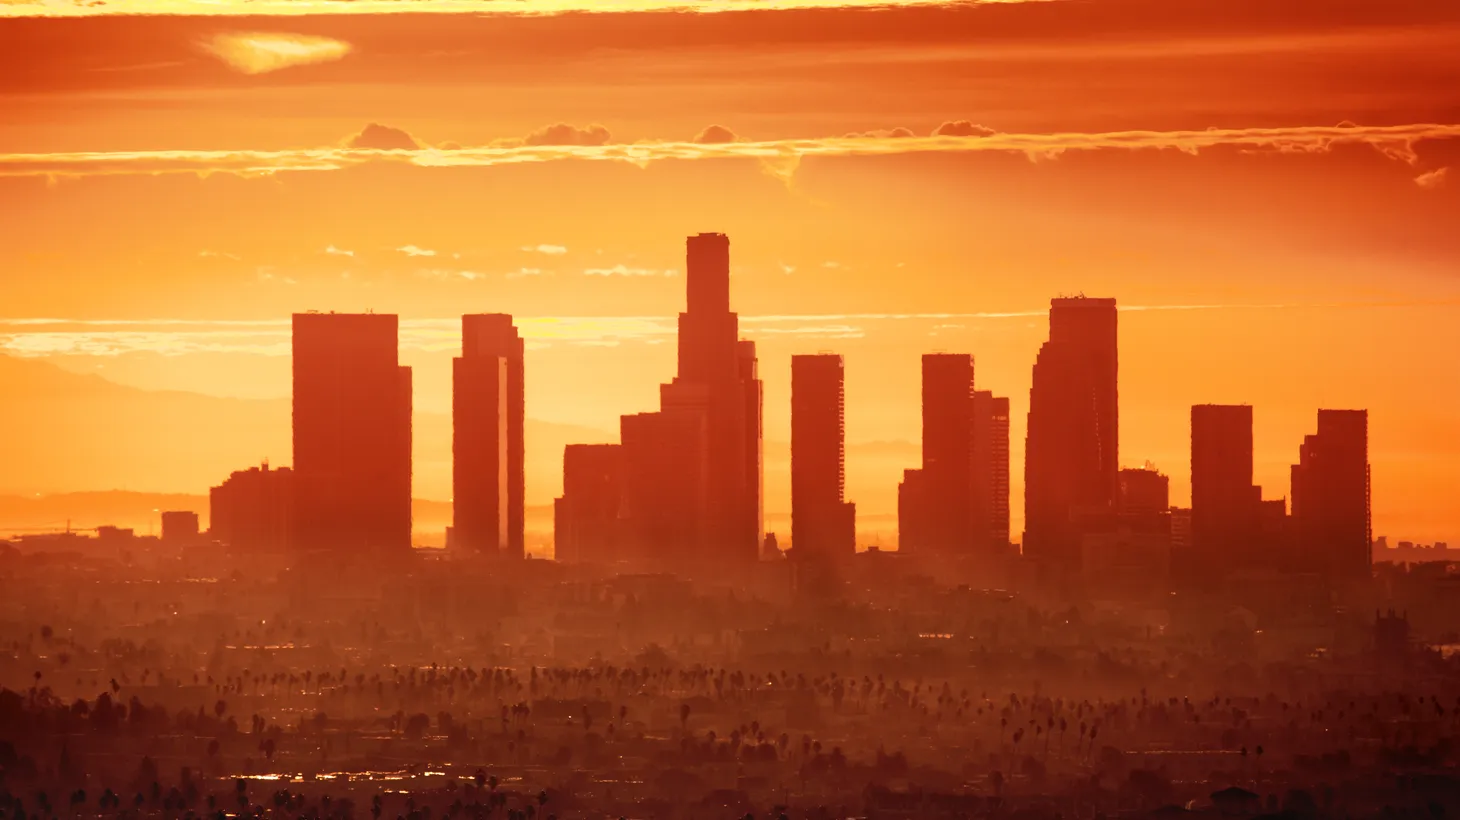 As LA continues to get hotter, Chief Heat Officer Marta Segura will be tasked with keeping Angelenos safe from rising temperatures with early warning systems and heat mitigation tactics.